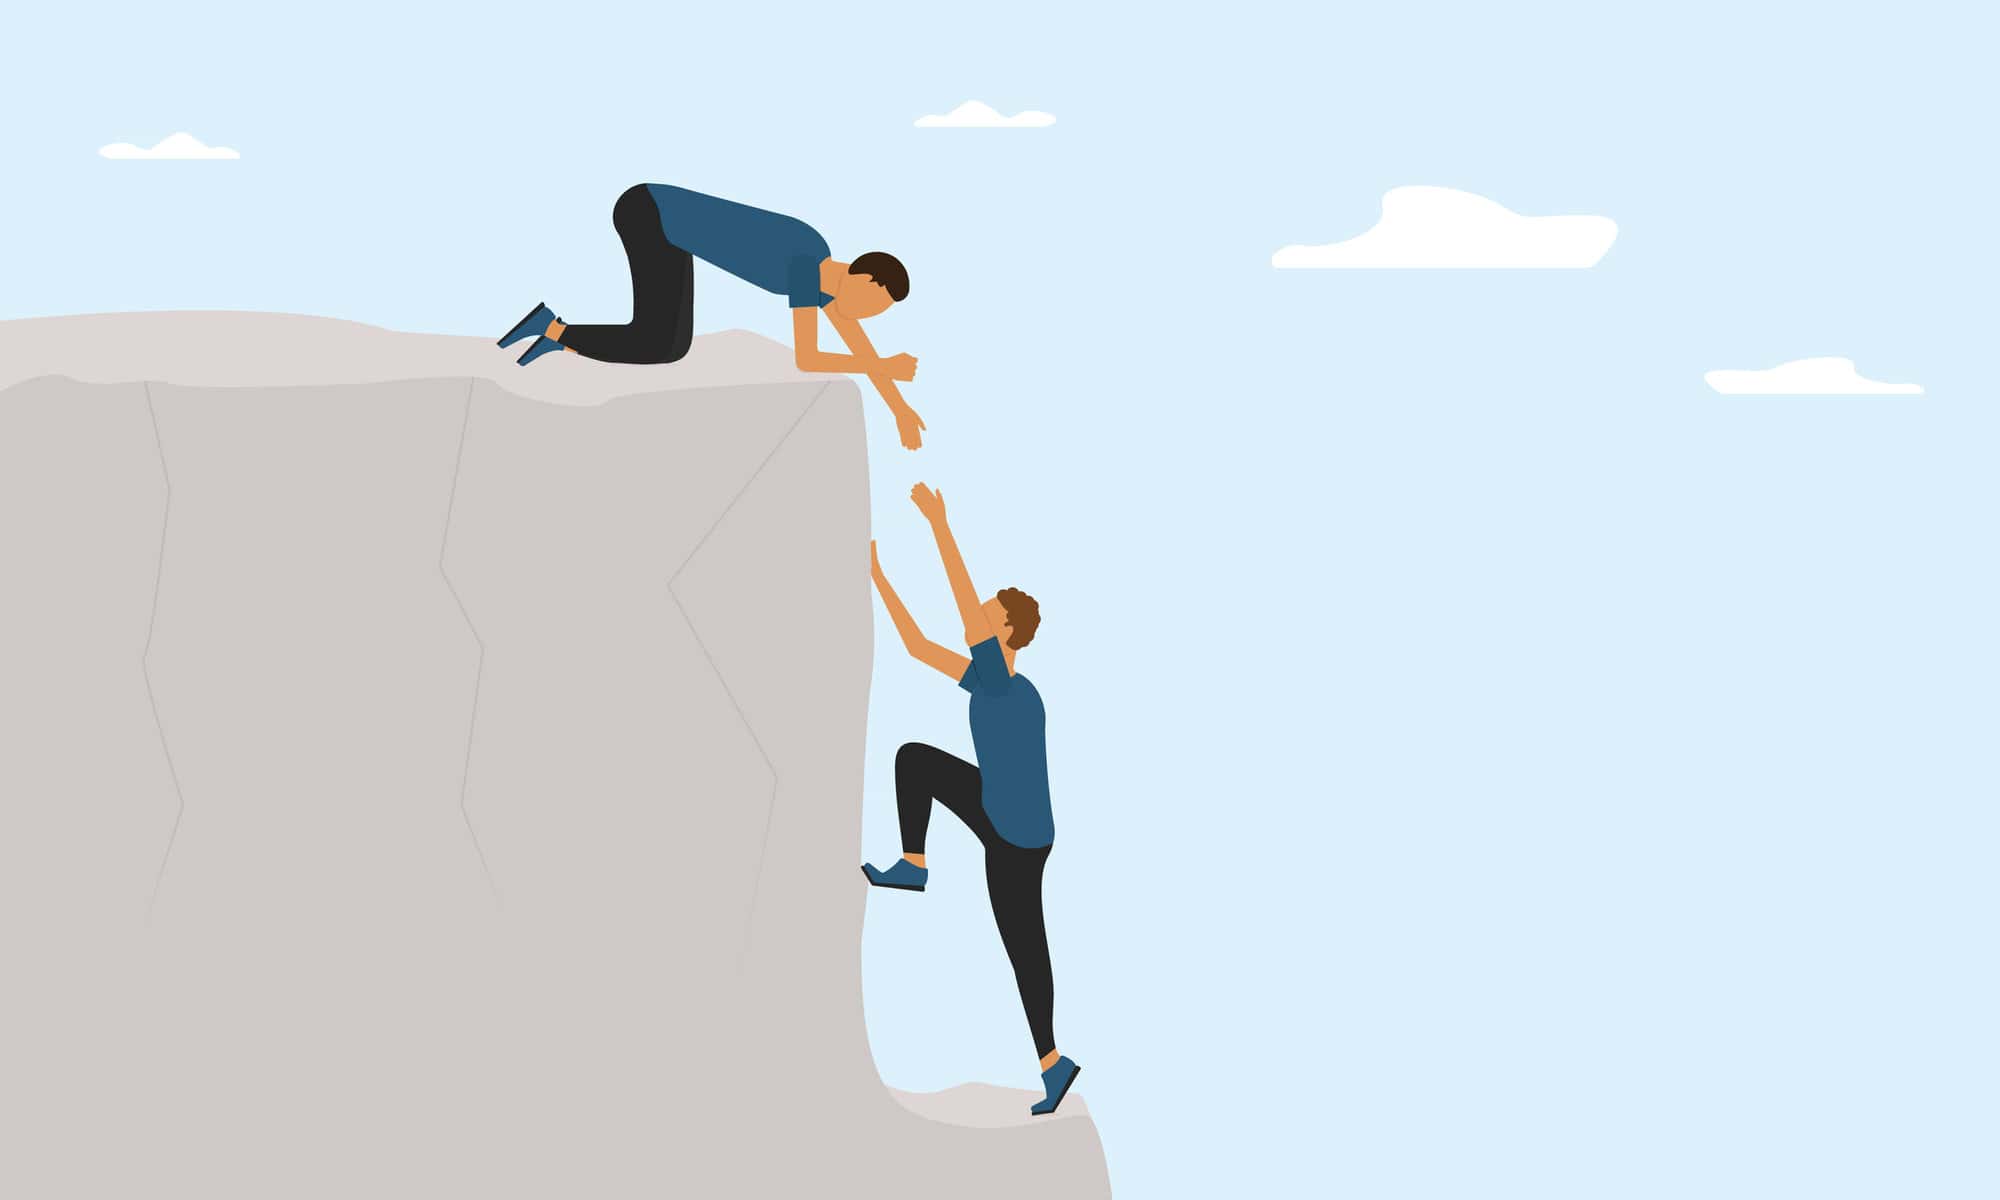 Man extends a helping hand to a friend on the edge of a cliff. The concept of helping those in need, support and cooperation. Concept. Vector illustration.